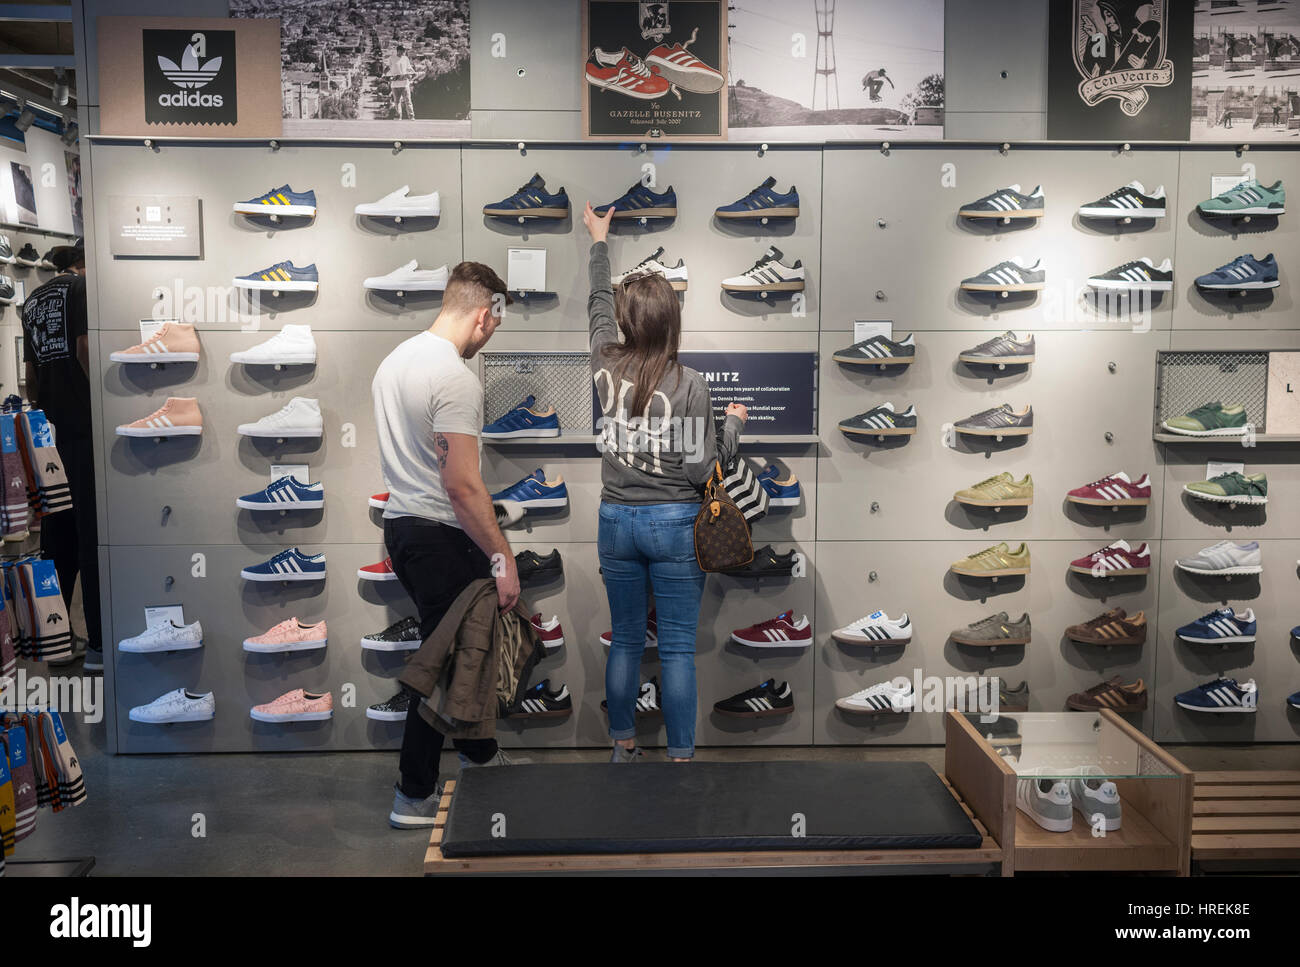 Customers browse footwear in the Adidas flagship store on Fifth Avenue in  New York on Tuesday, February 28, 2017. Consumer confidence is reported to  be at the highest level since July 2001.(©